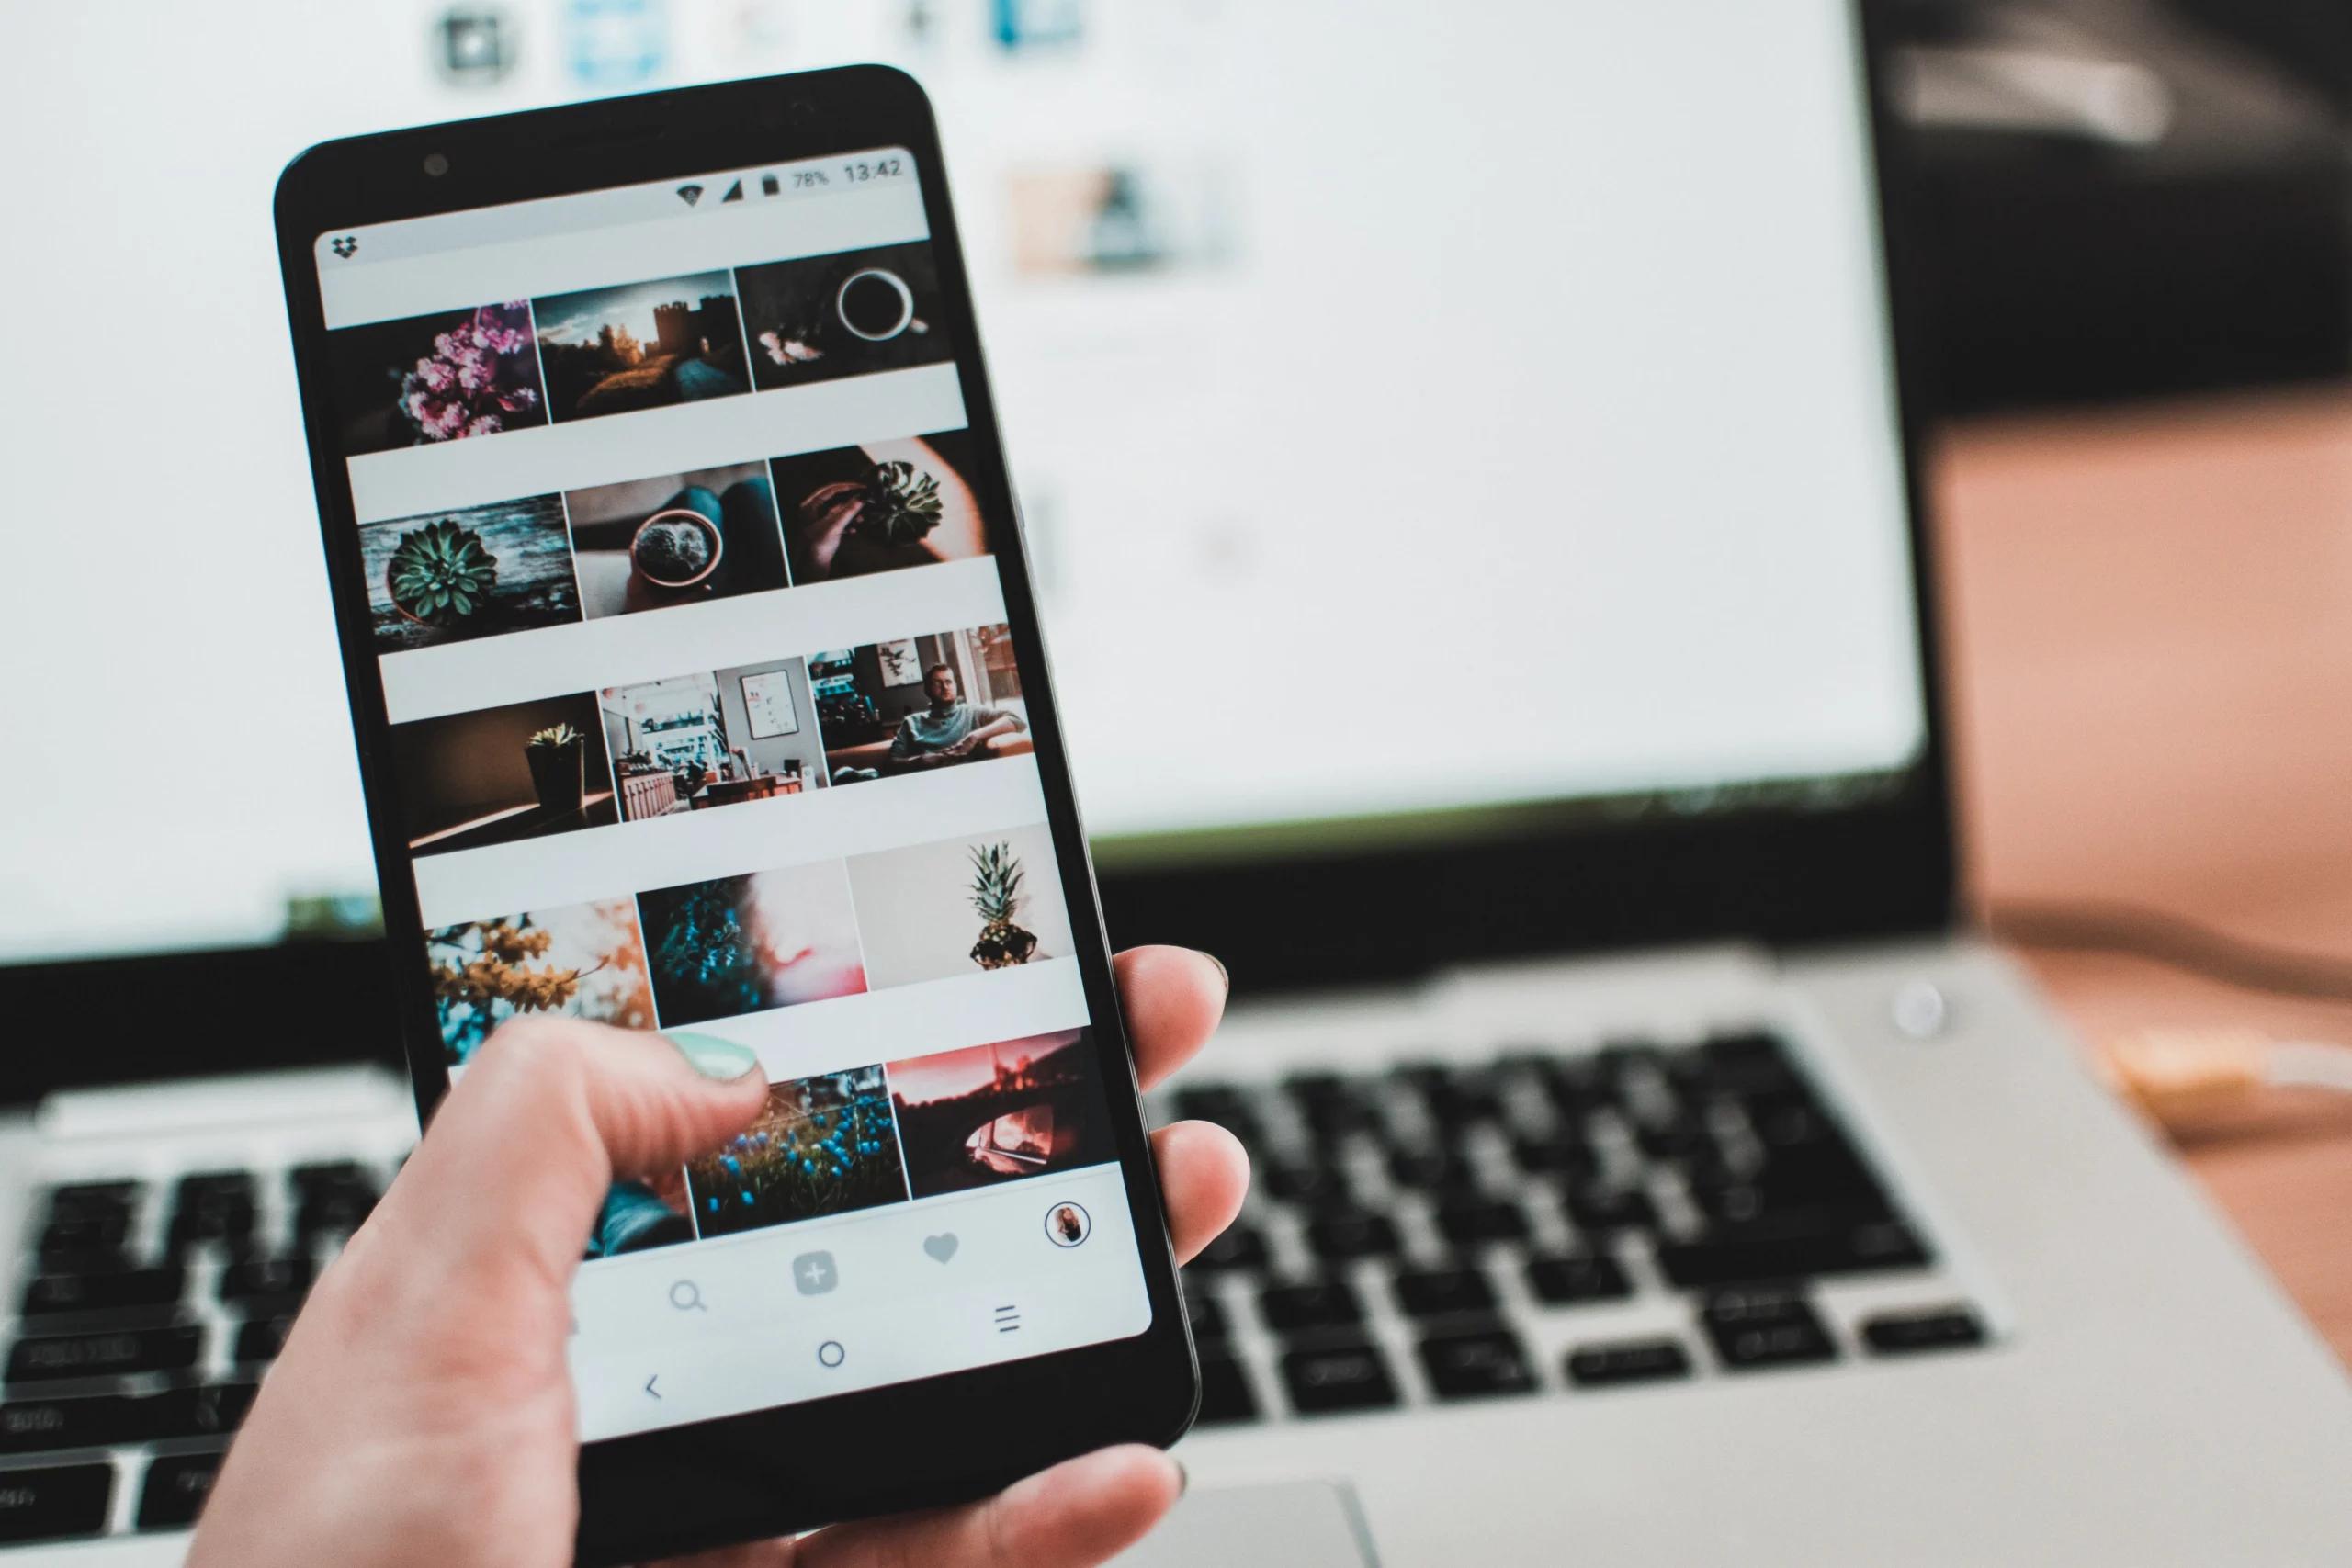 How to Stop Instagram From Saving Posts to Camera Roll